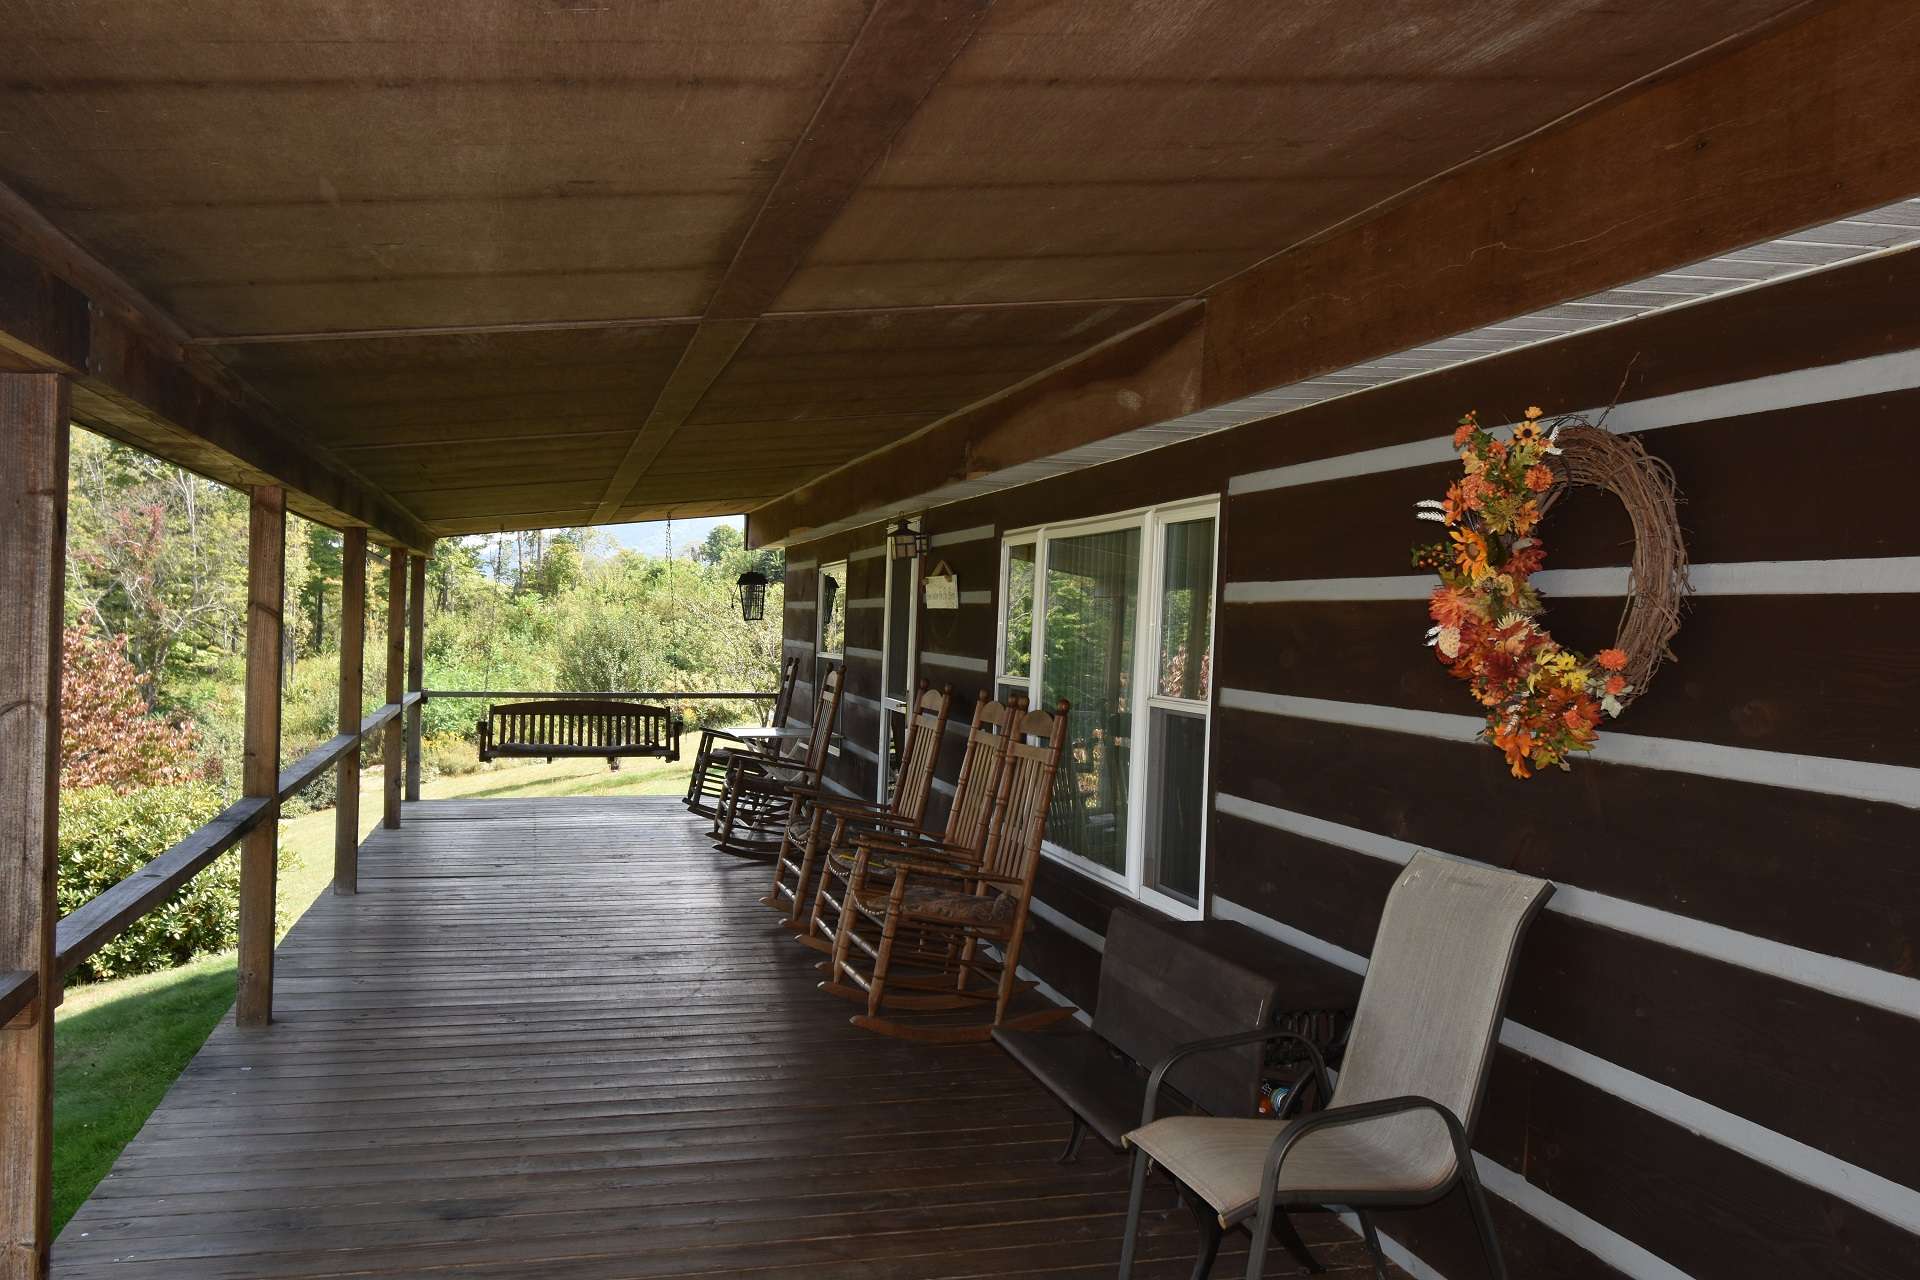 A full length covered rocking chair front porch welcomes you sit awhile to enjoy the views.